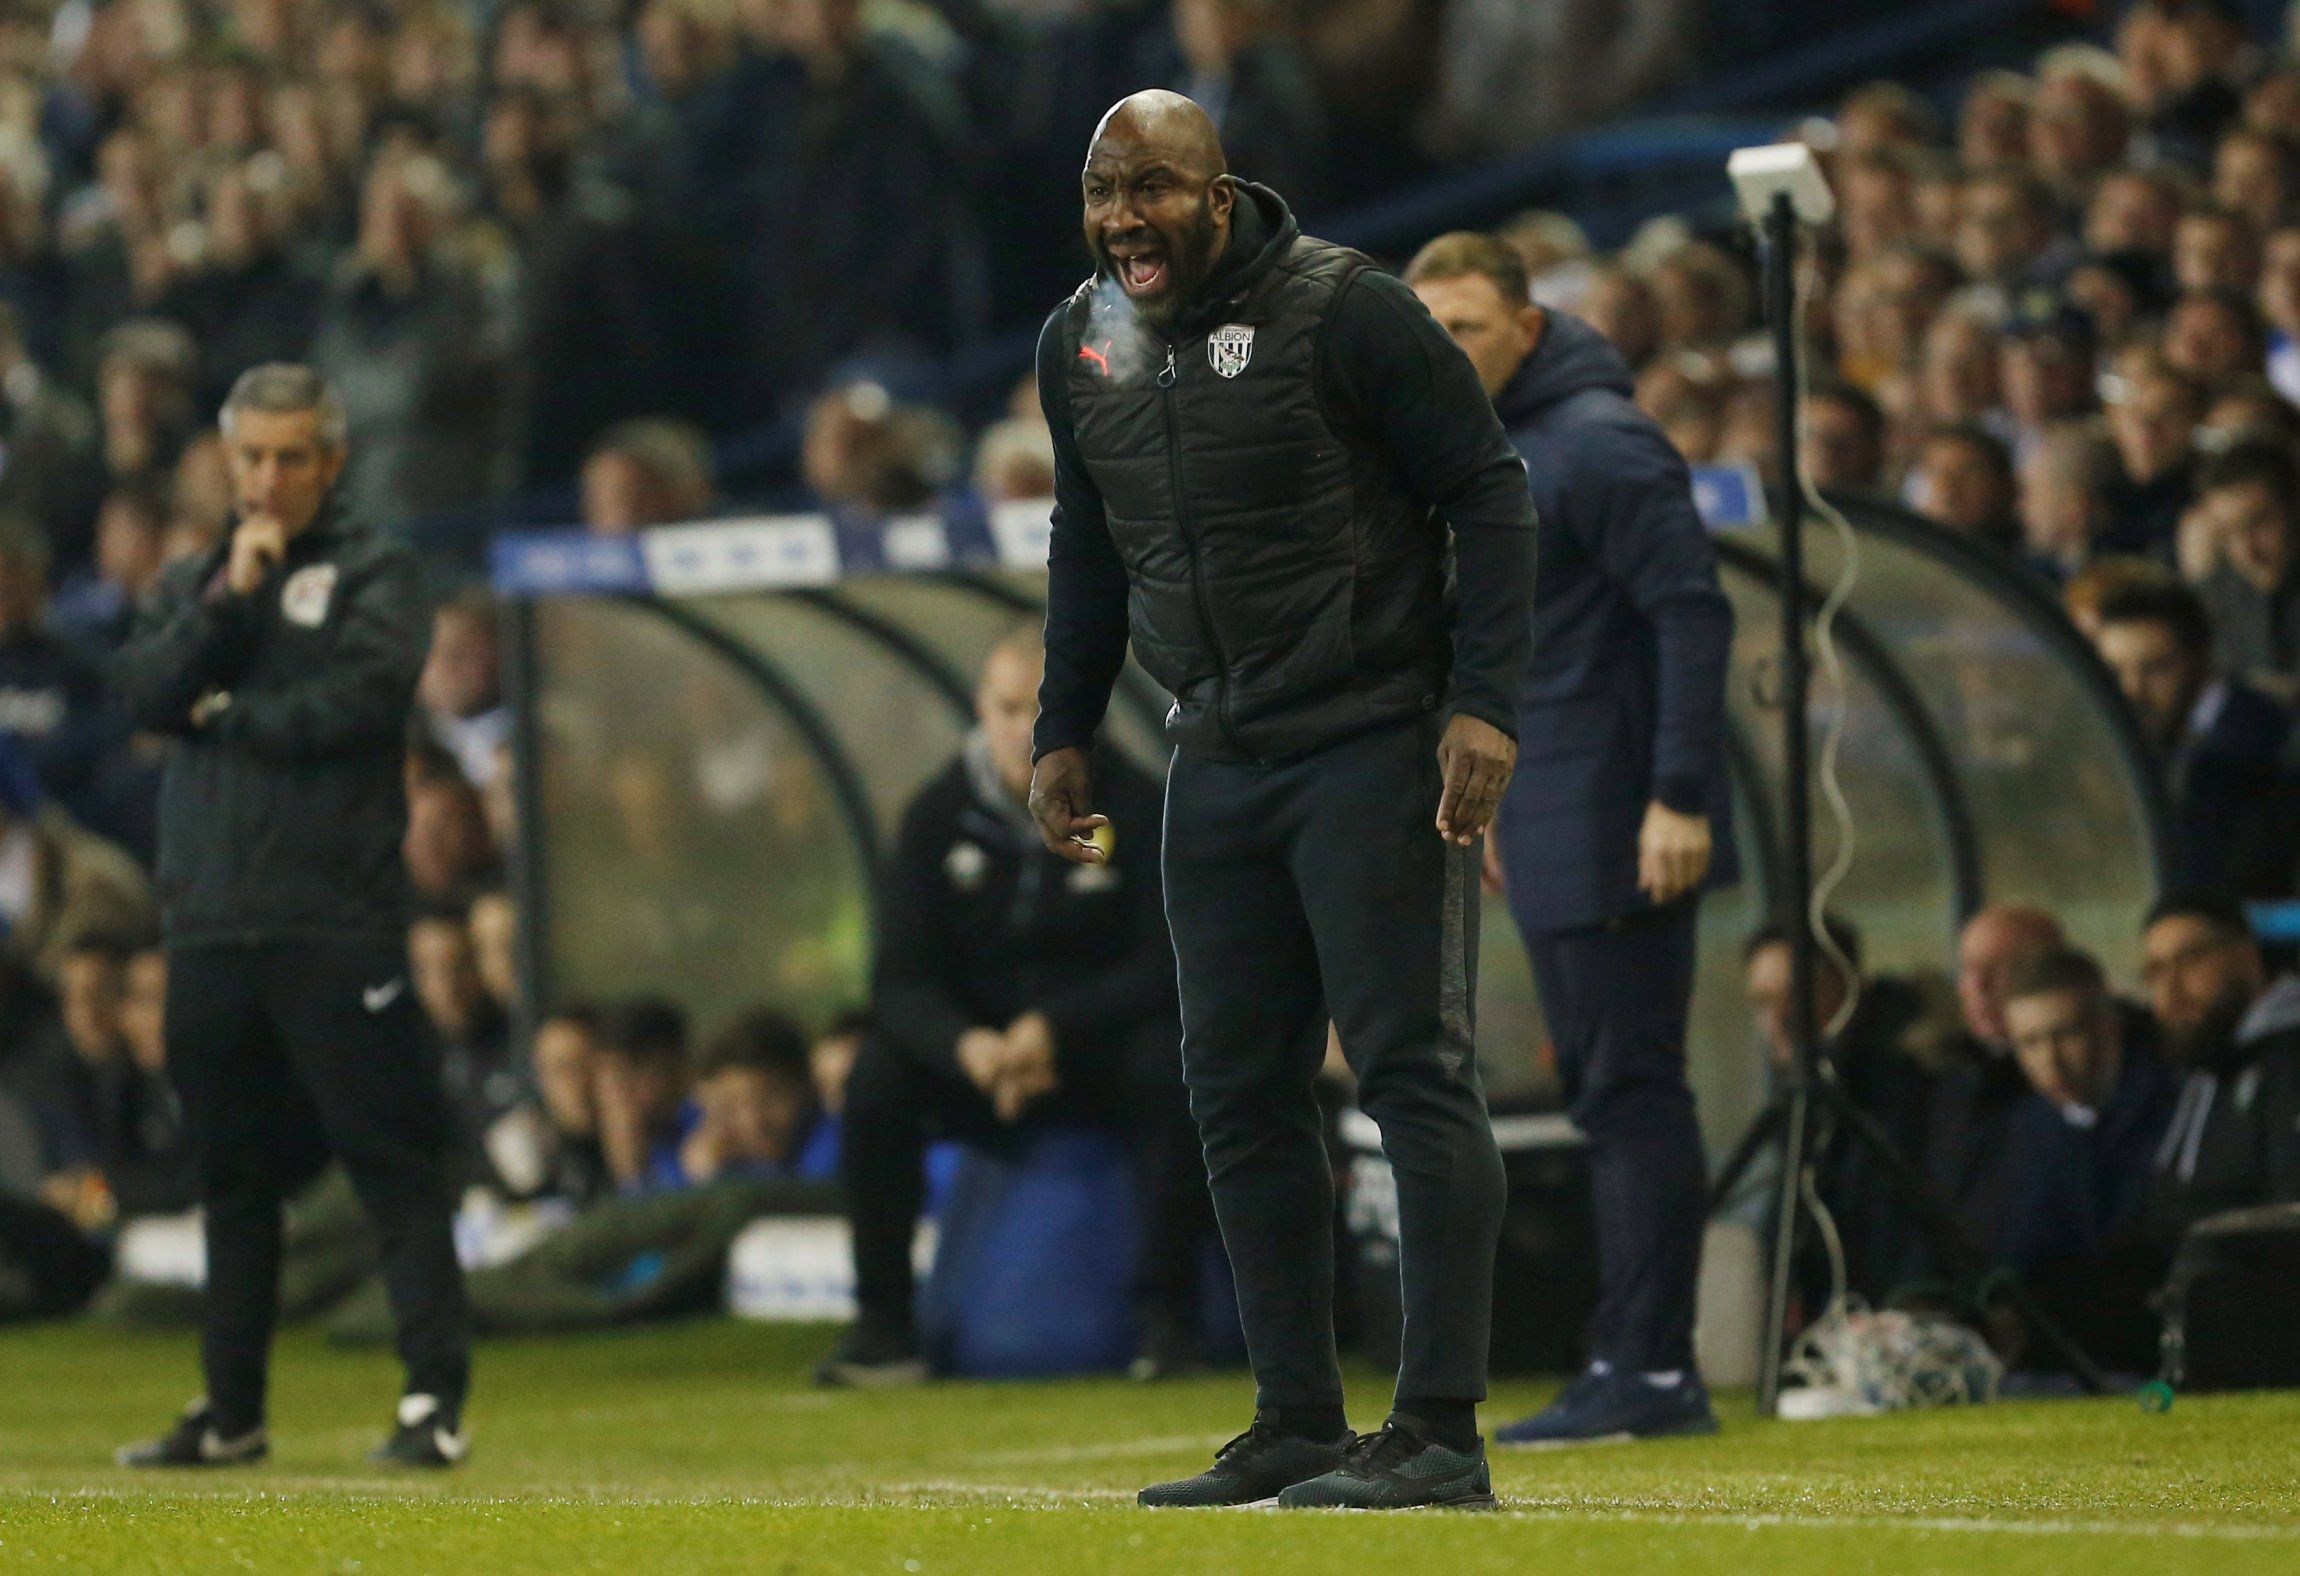 West Bromwich Albion manager Darren Moore is furious during 4-0 defeat to Leeds